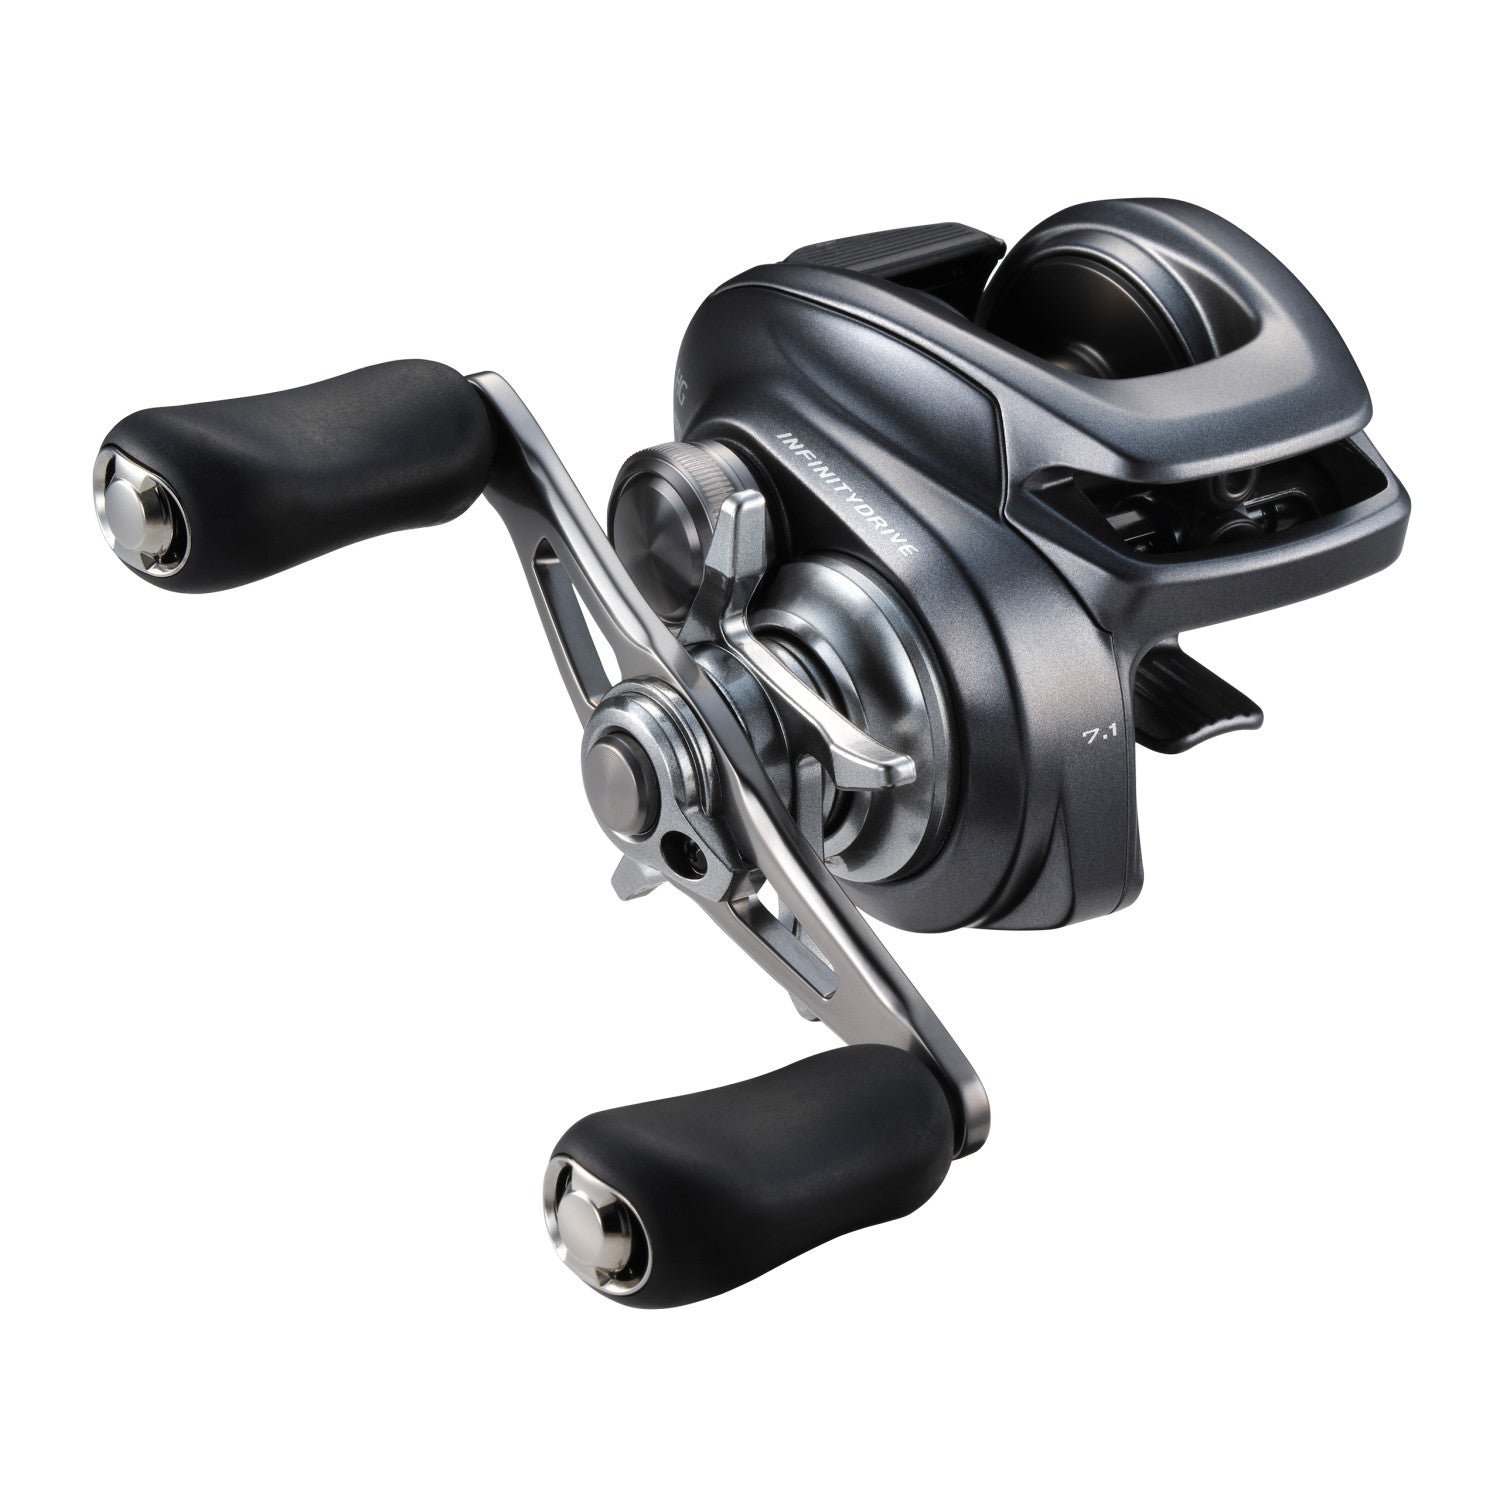 The perfect gift Baitcast Reels Shimano SLX DC 151 HG LEFT HANDED  Baitcaster Fishing Reel for any occasion